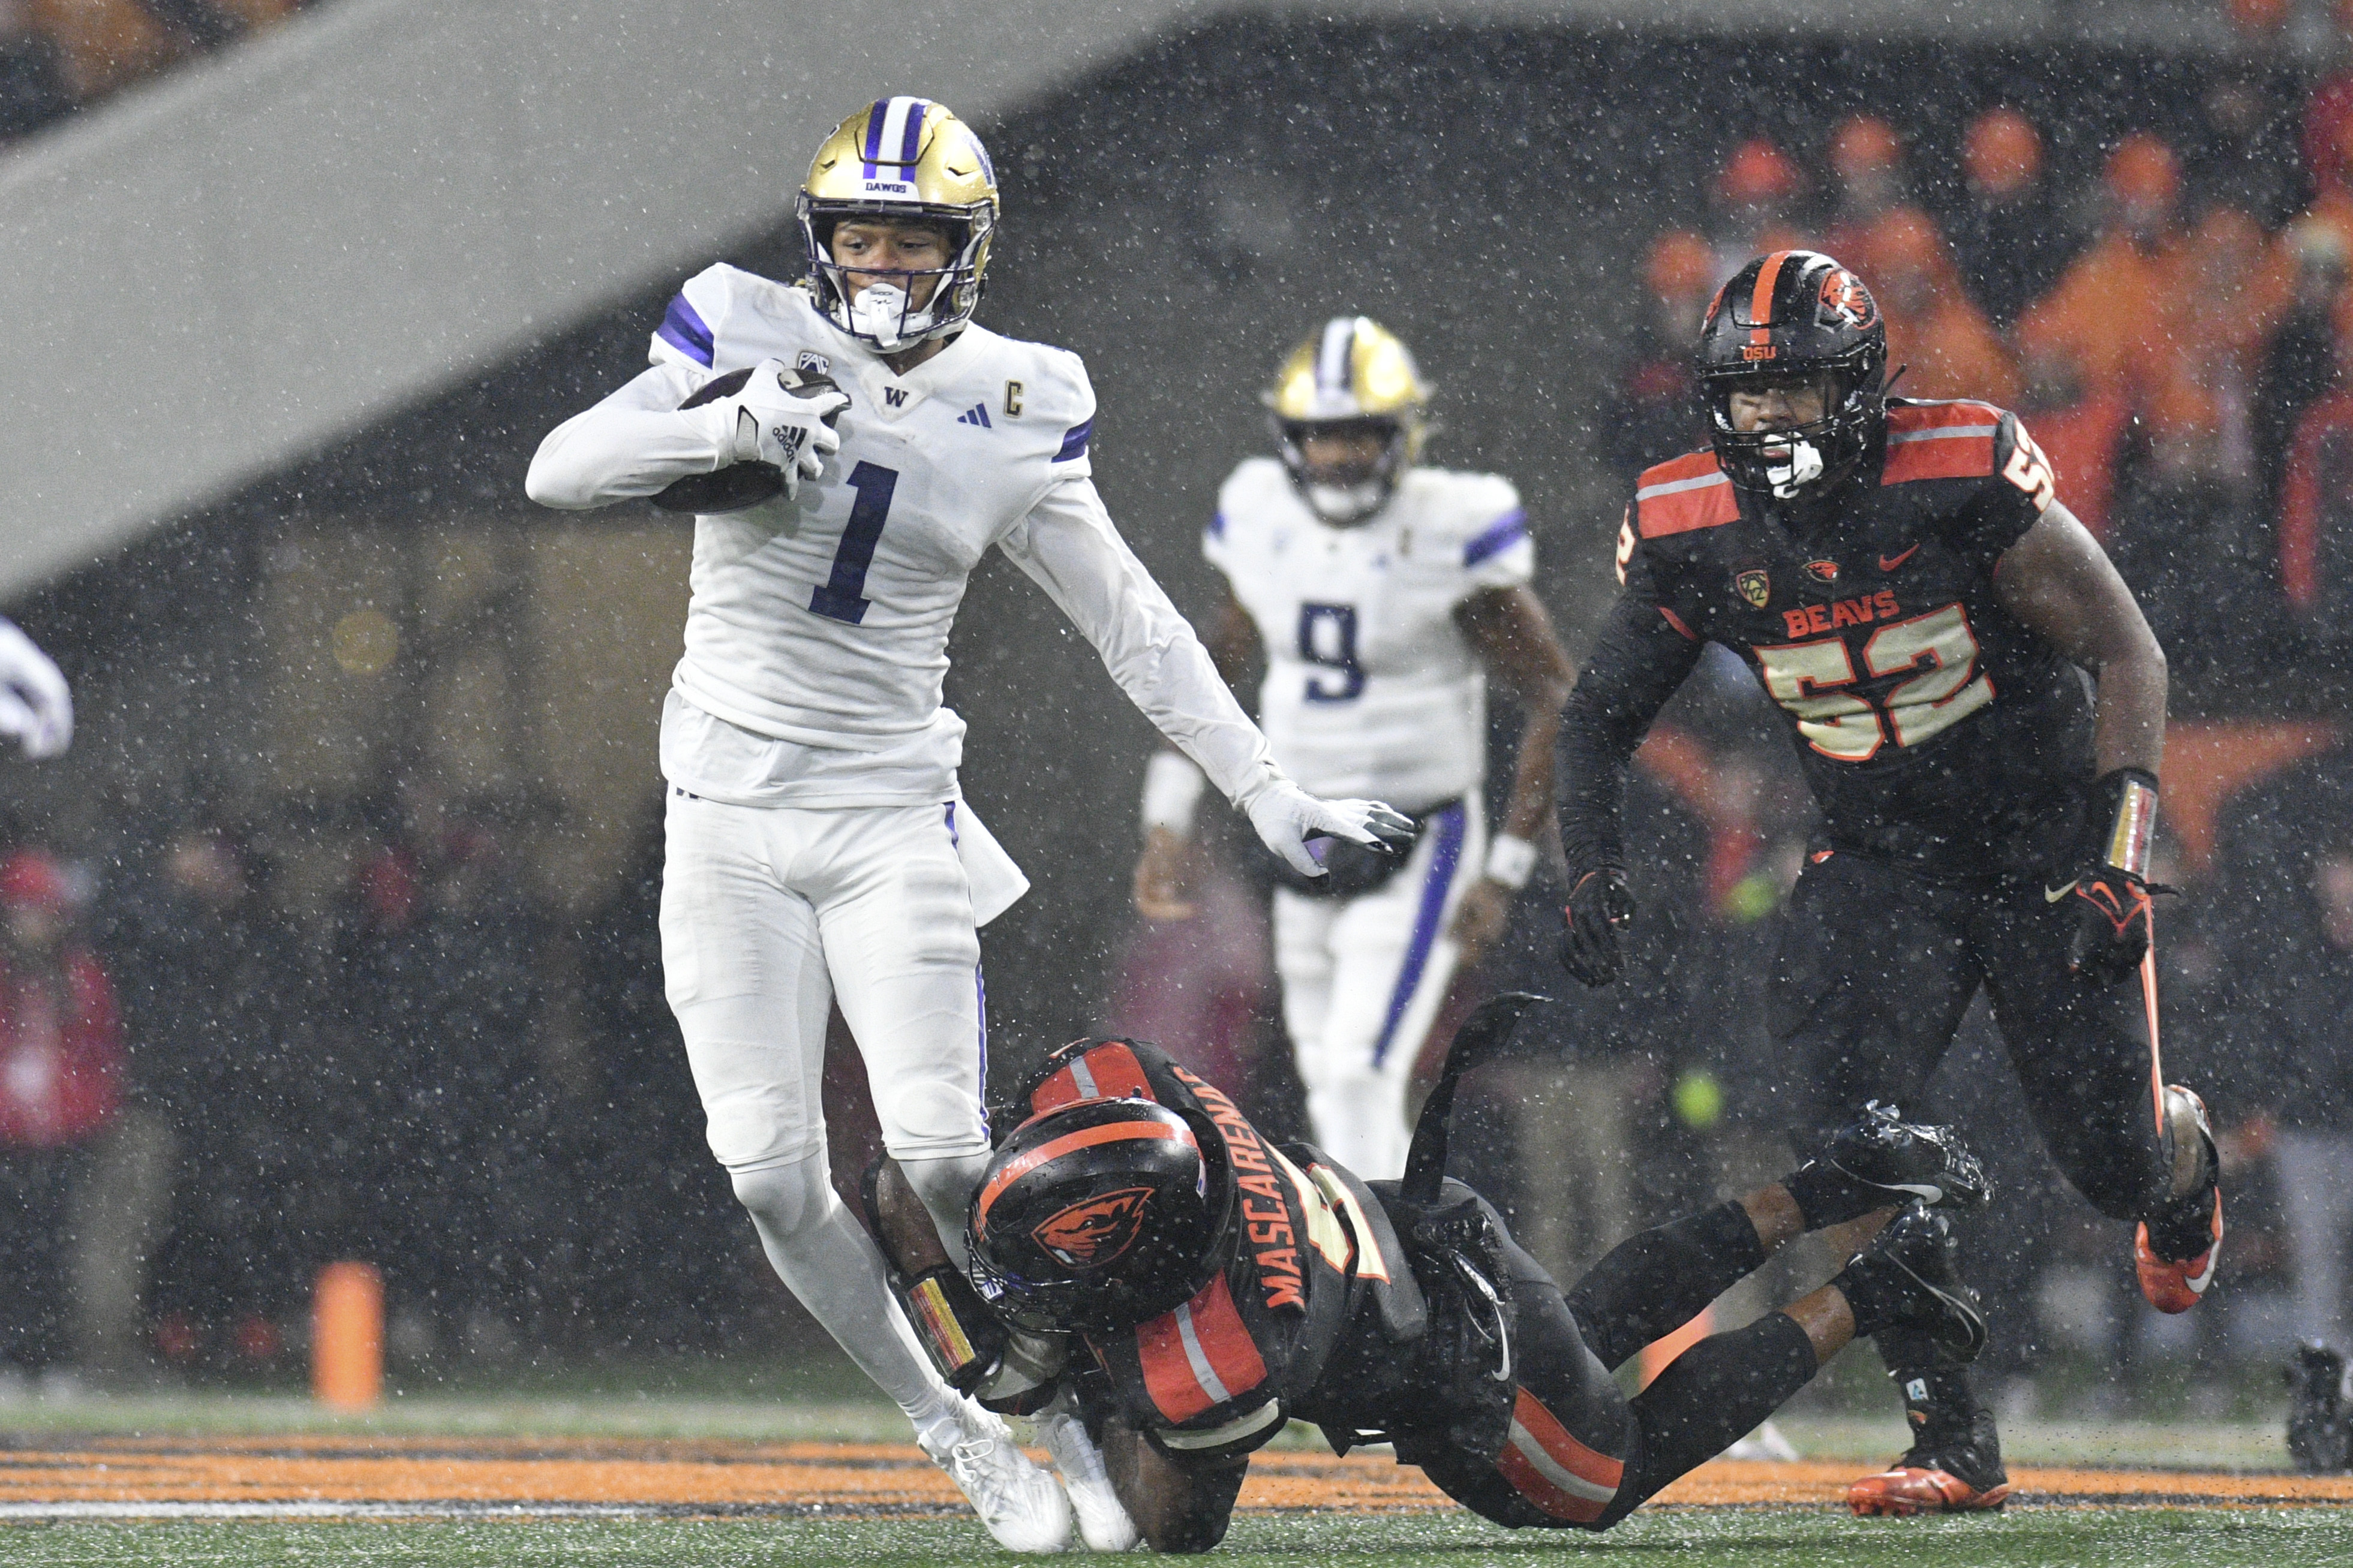 No. 5 Washington clinches Pac-12 championship berth with 22-20 victory over  No. 10 Oregon State - The San Diego Union-Tribune